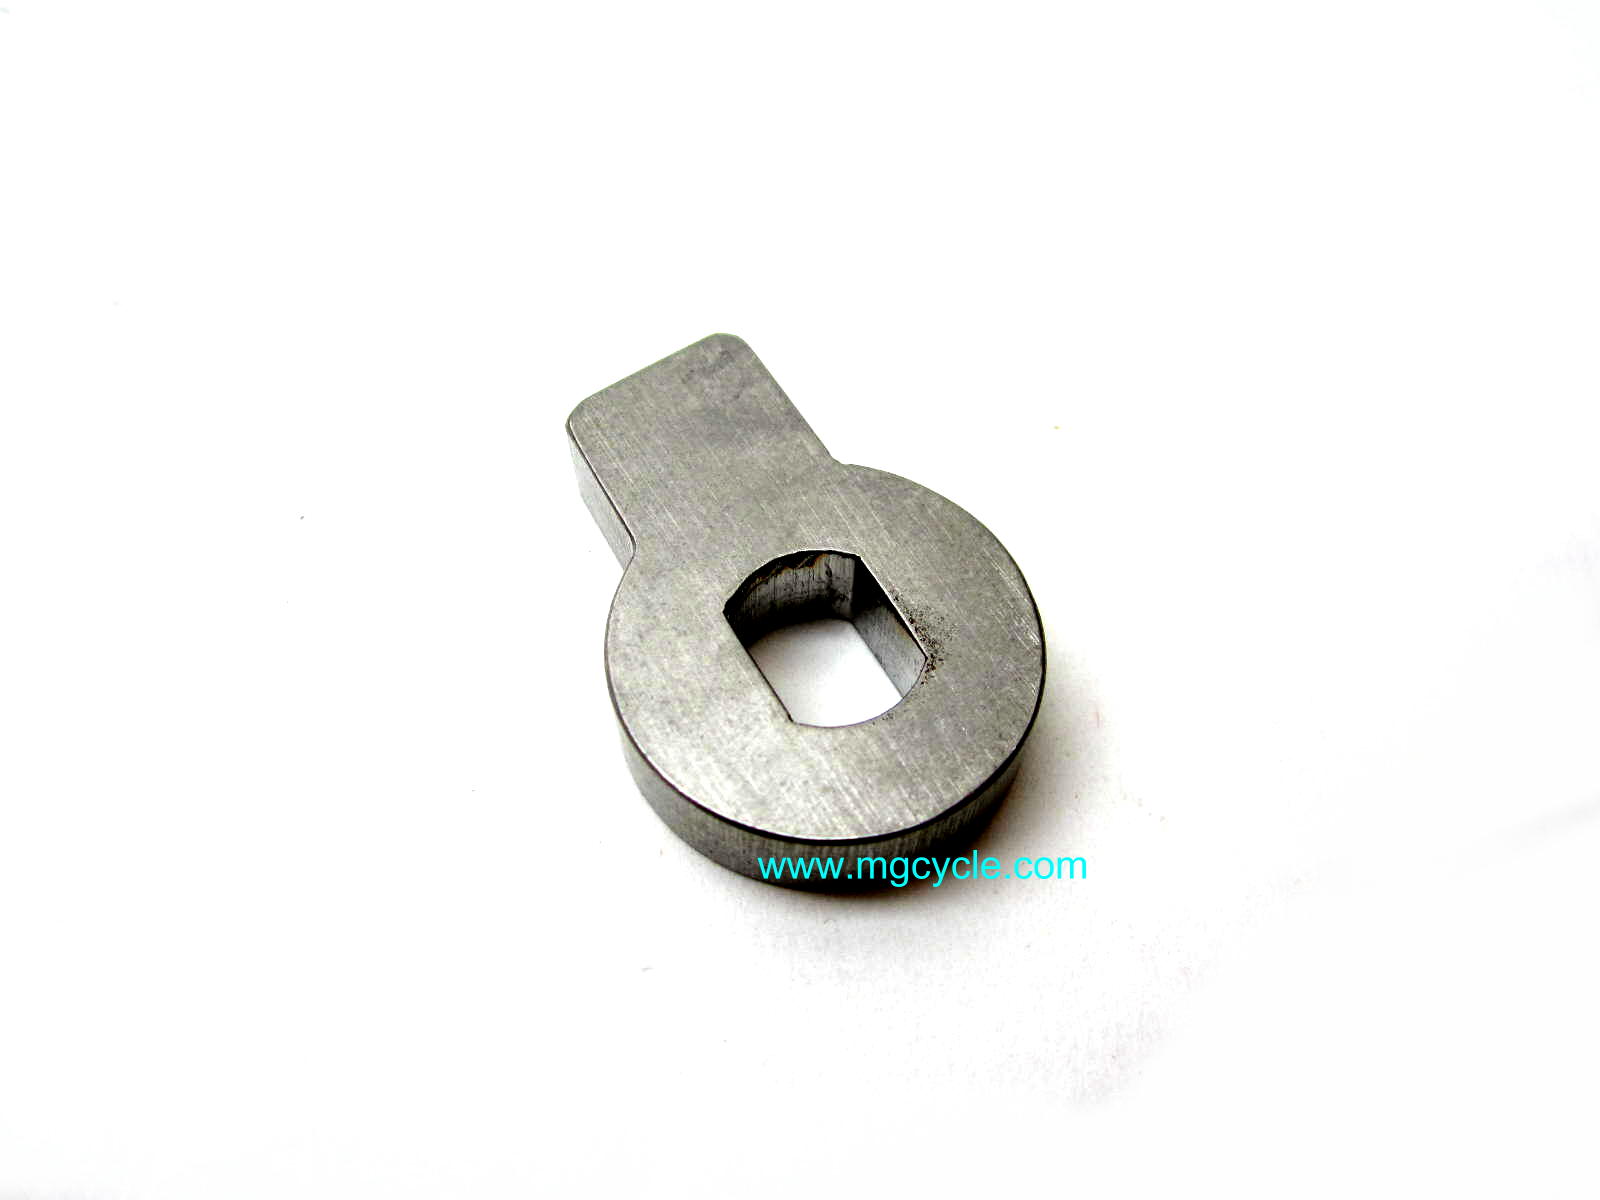 New improved stainless locking lug for side stands GU03432740 - Click Image to Close